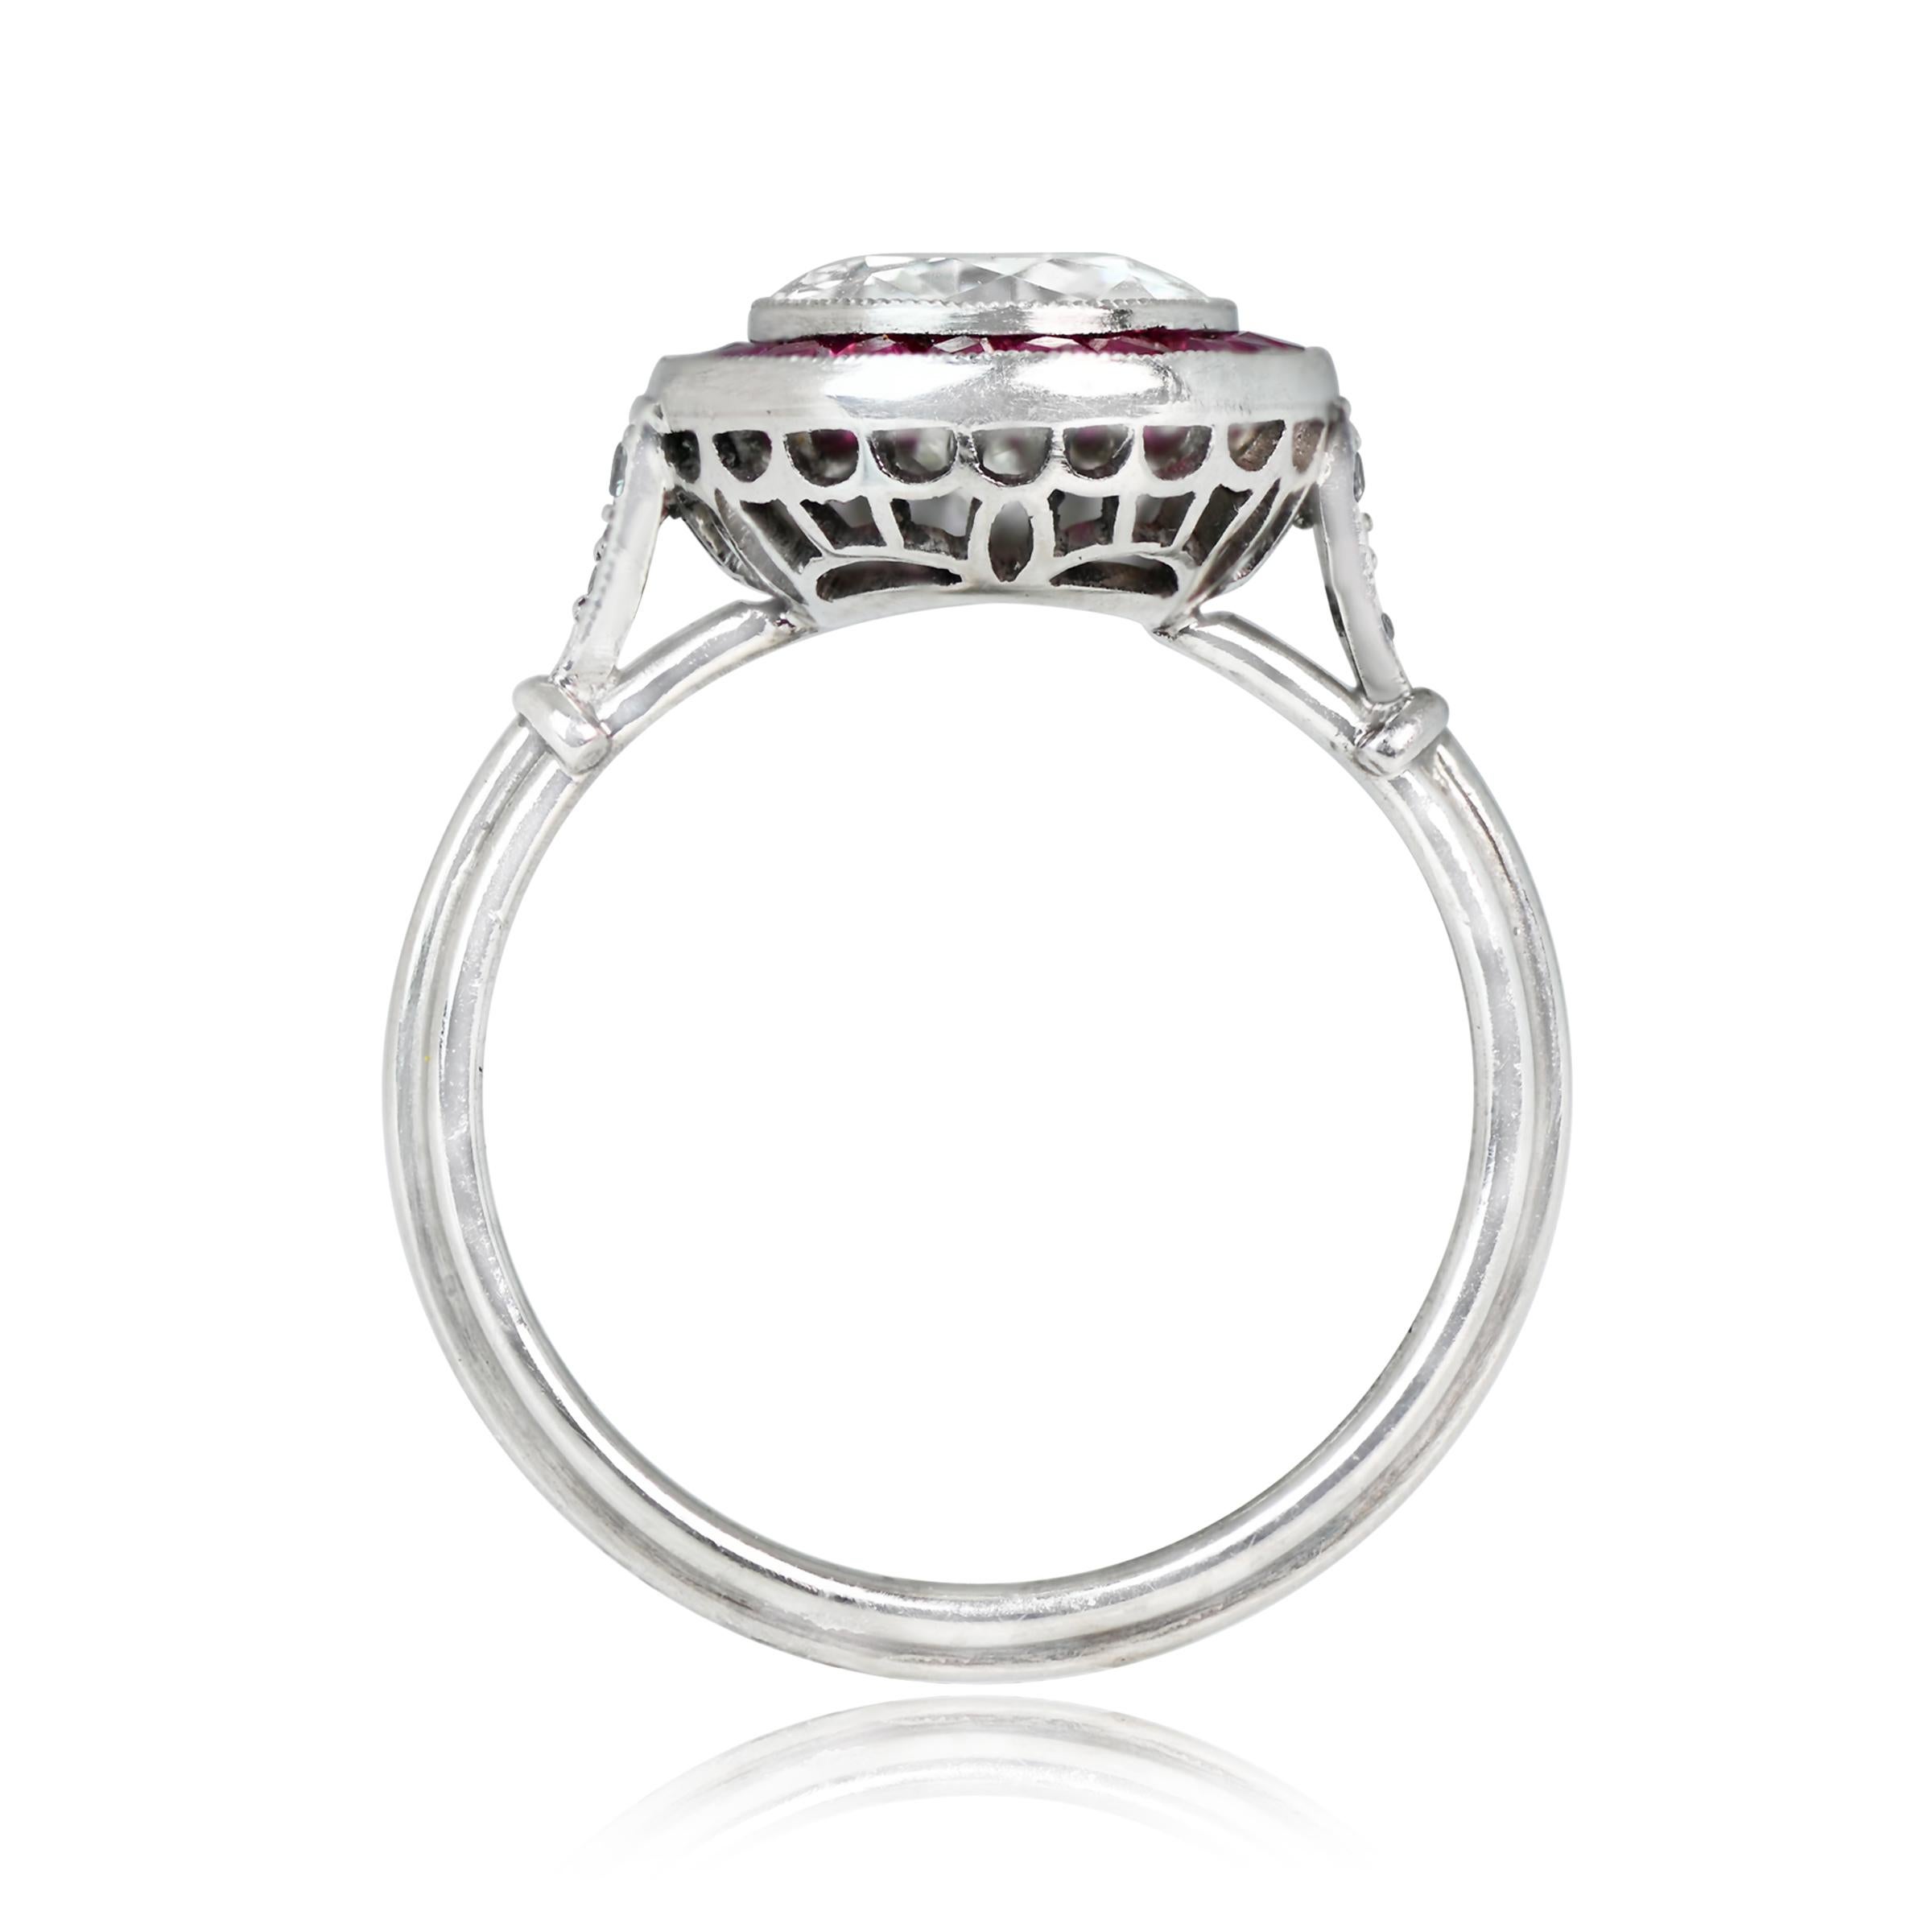 Old European Cut 1.59 Ct Old Euro-Cut Diamond Engagement Ring, VS1 Clarity, Ruby Halo, Platinum For Sale